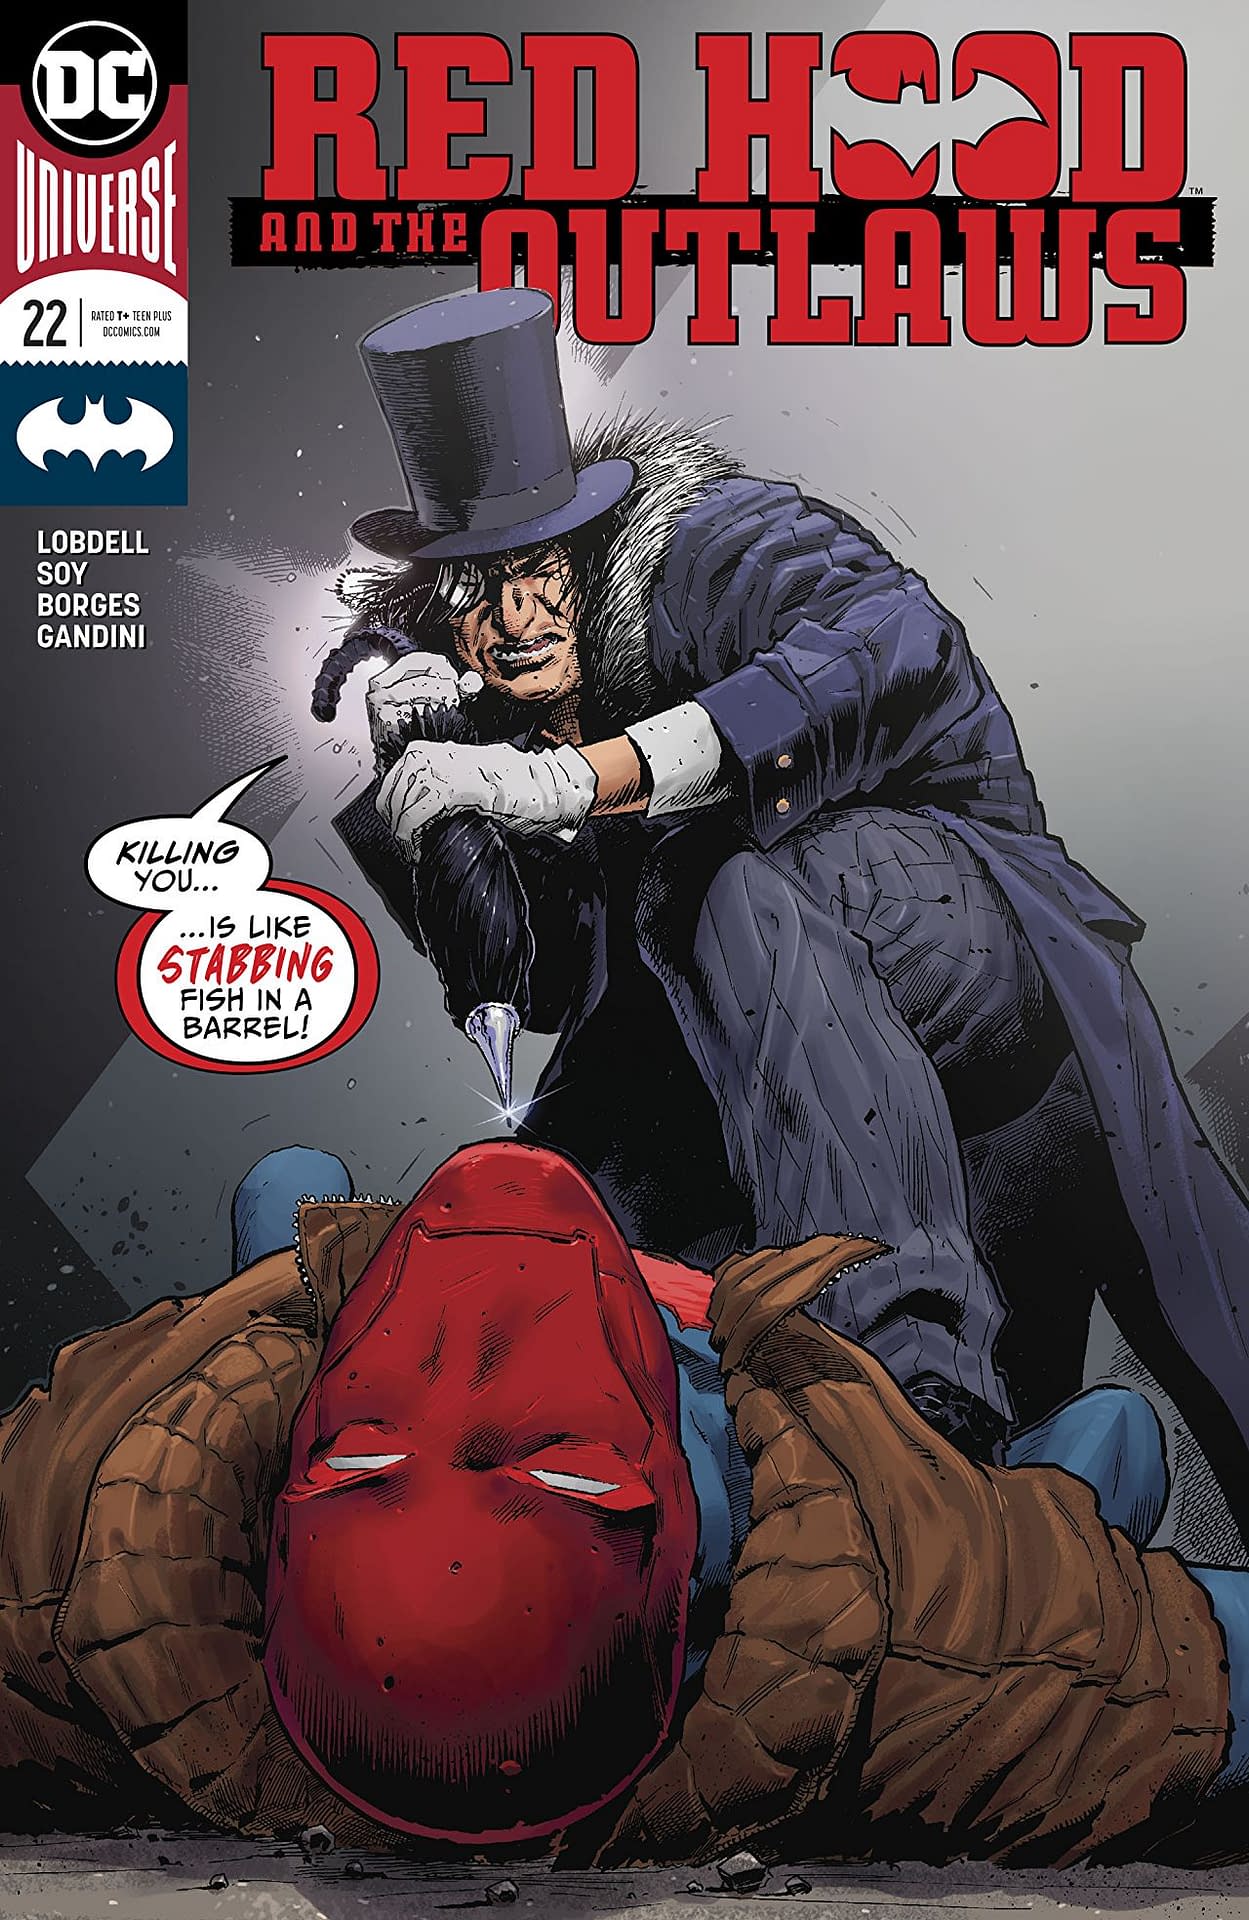 Red Hood and the Outlaws #22 Review: The of Bizarro